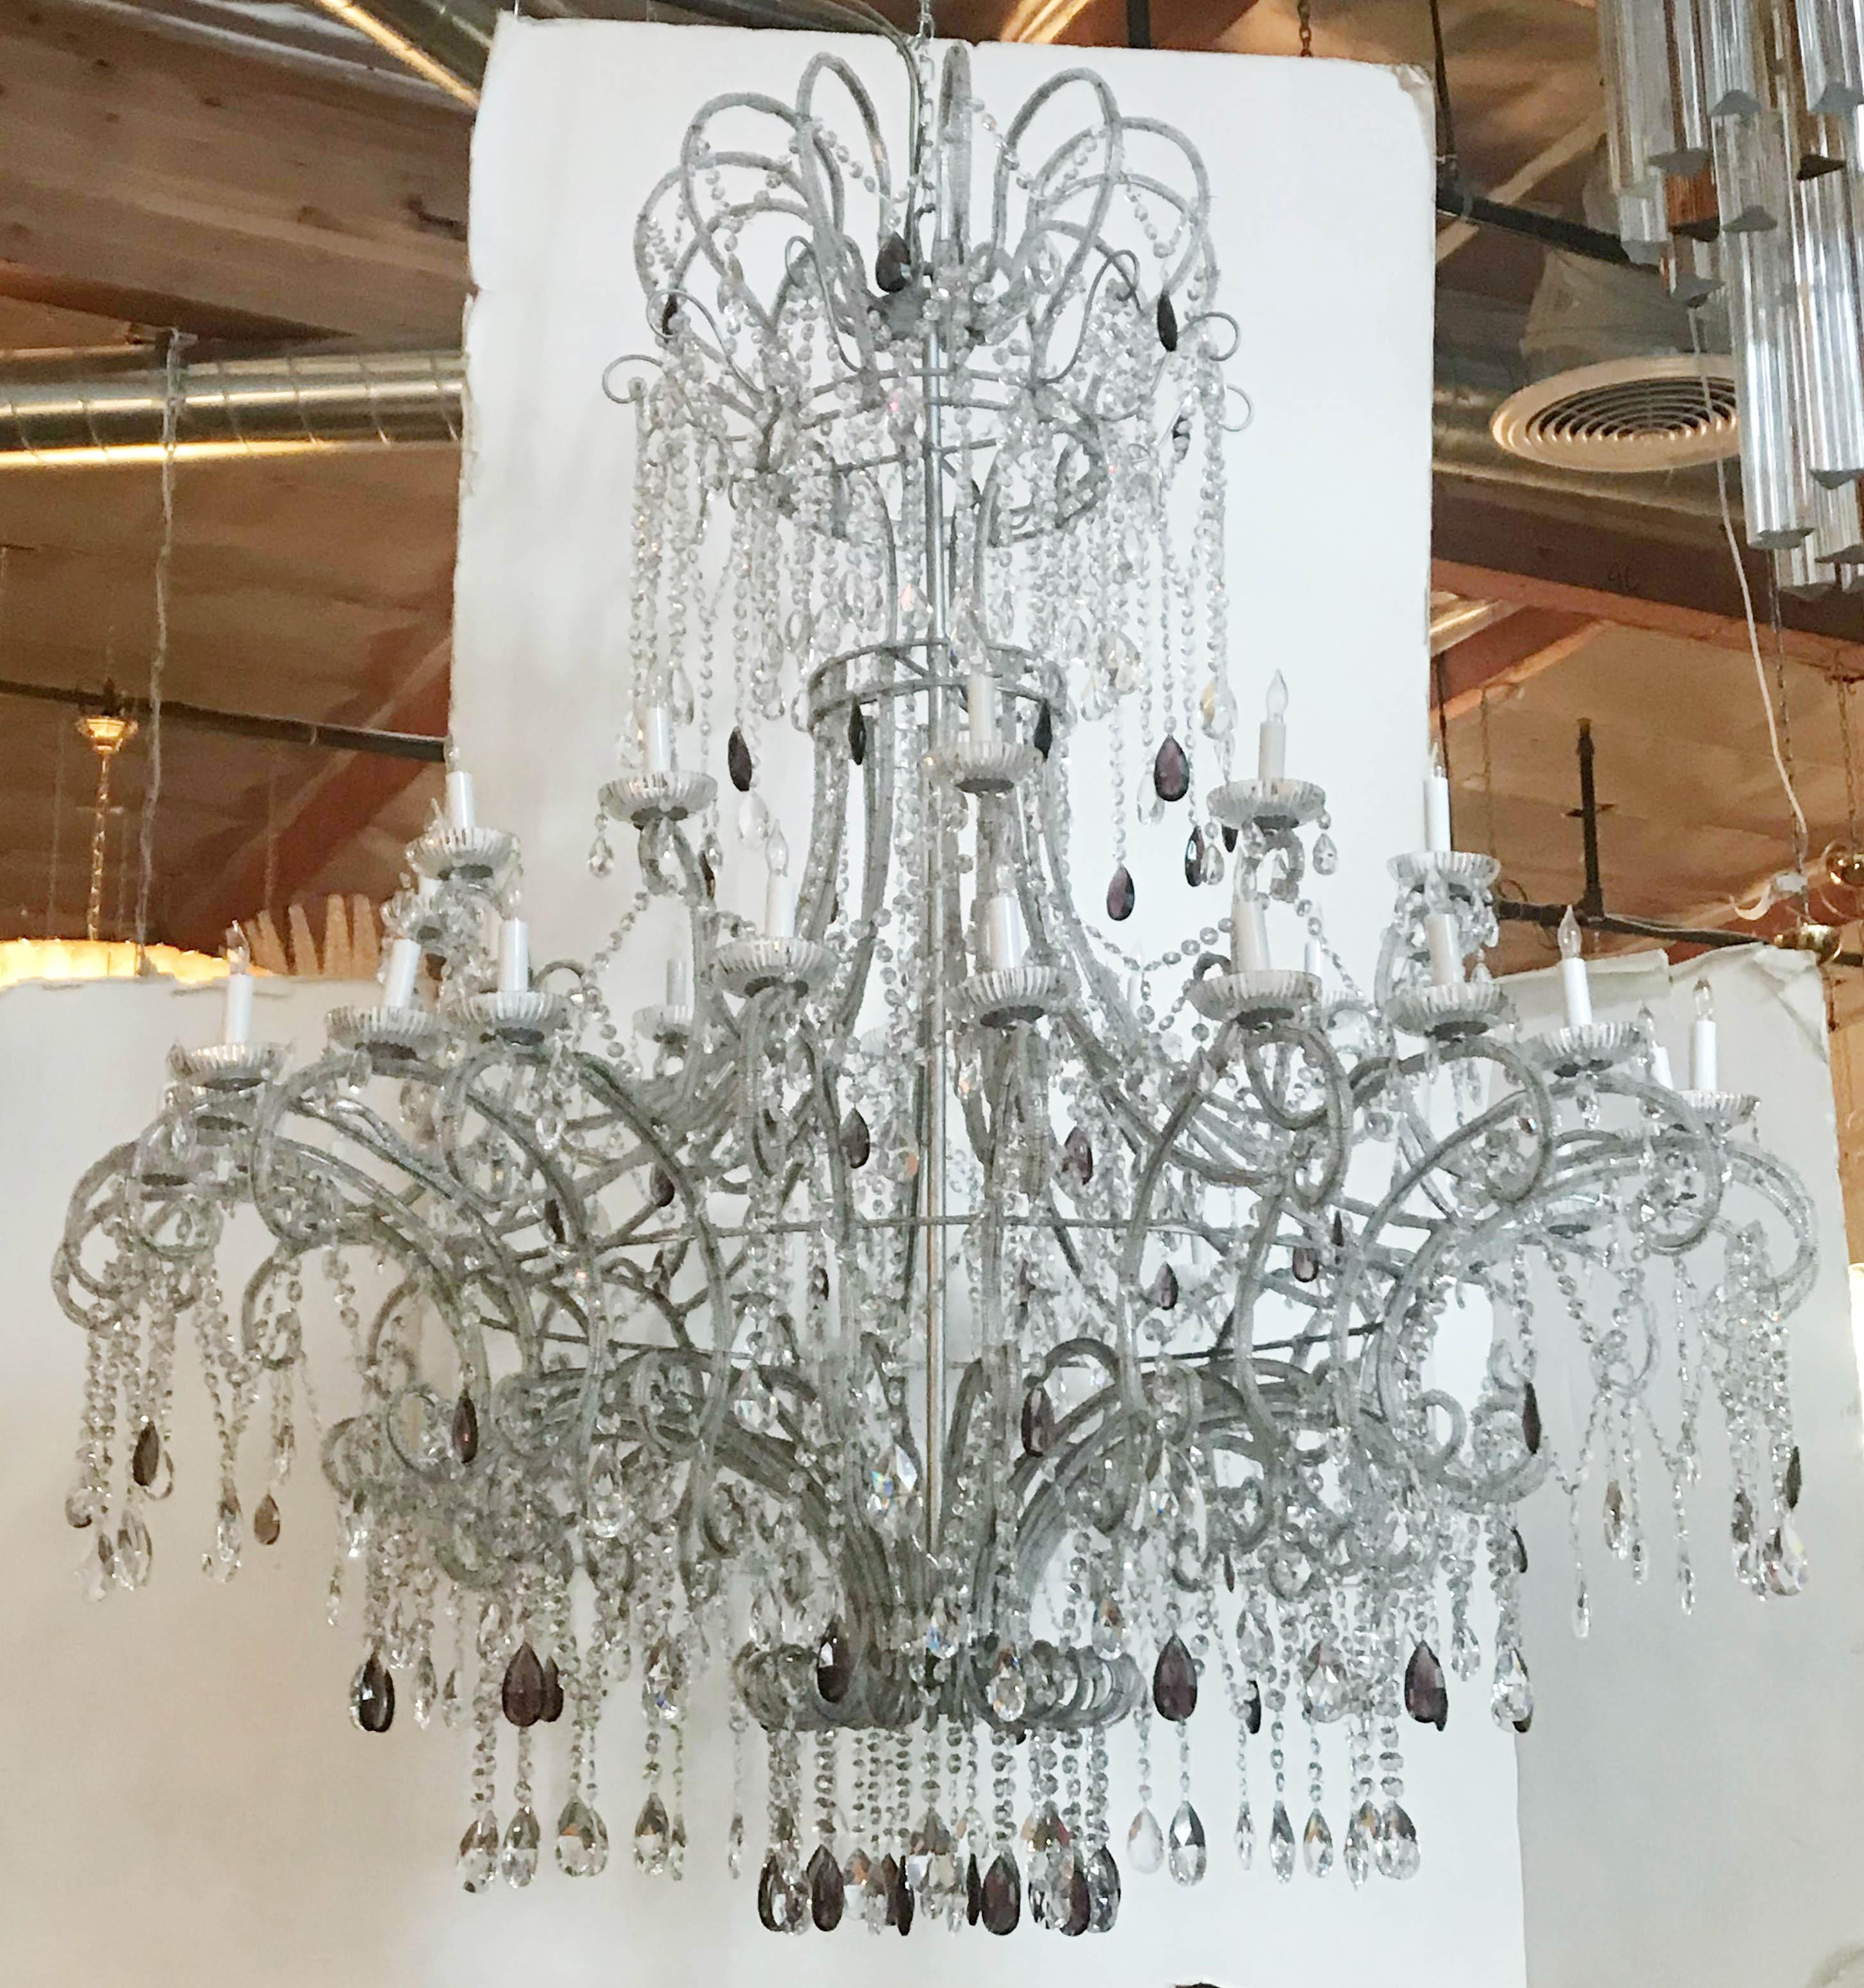 Vintage monumental Italian beaded Florentine chandelier with clear and amethyst faceted crystals mounted on wrought iron silver painted frame / Made in Italy, circa 1970s
36-light arranged in 2 tiers / E12 type / max 40W each
Measures: Diameter 60